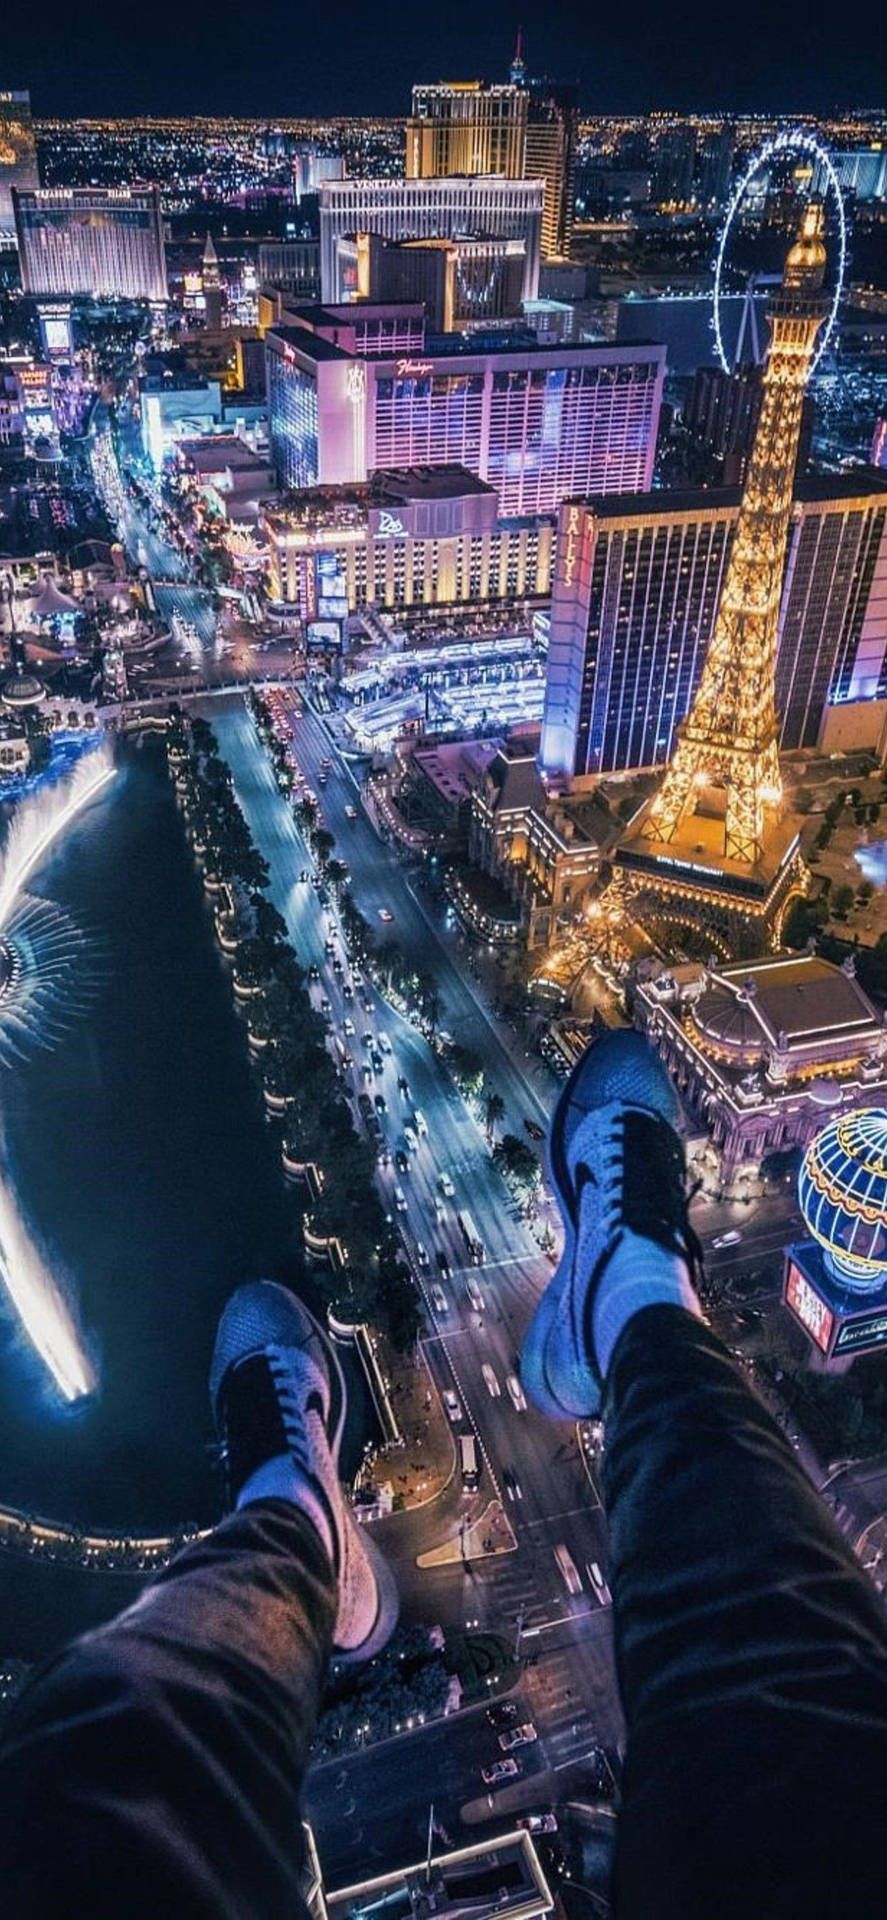 A view of las vegas from above - Las Vegas